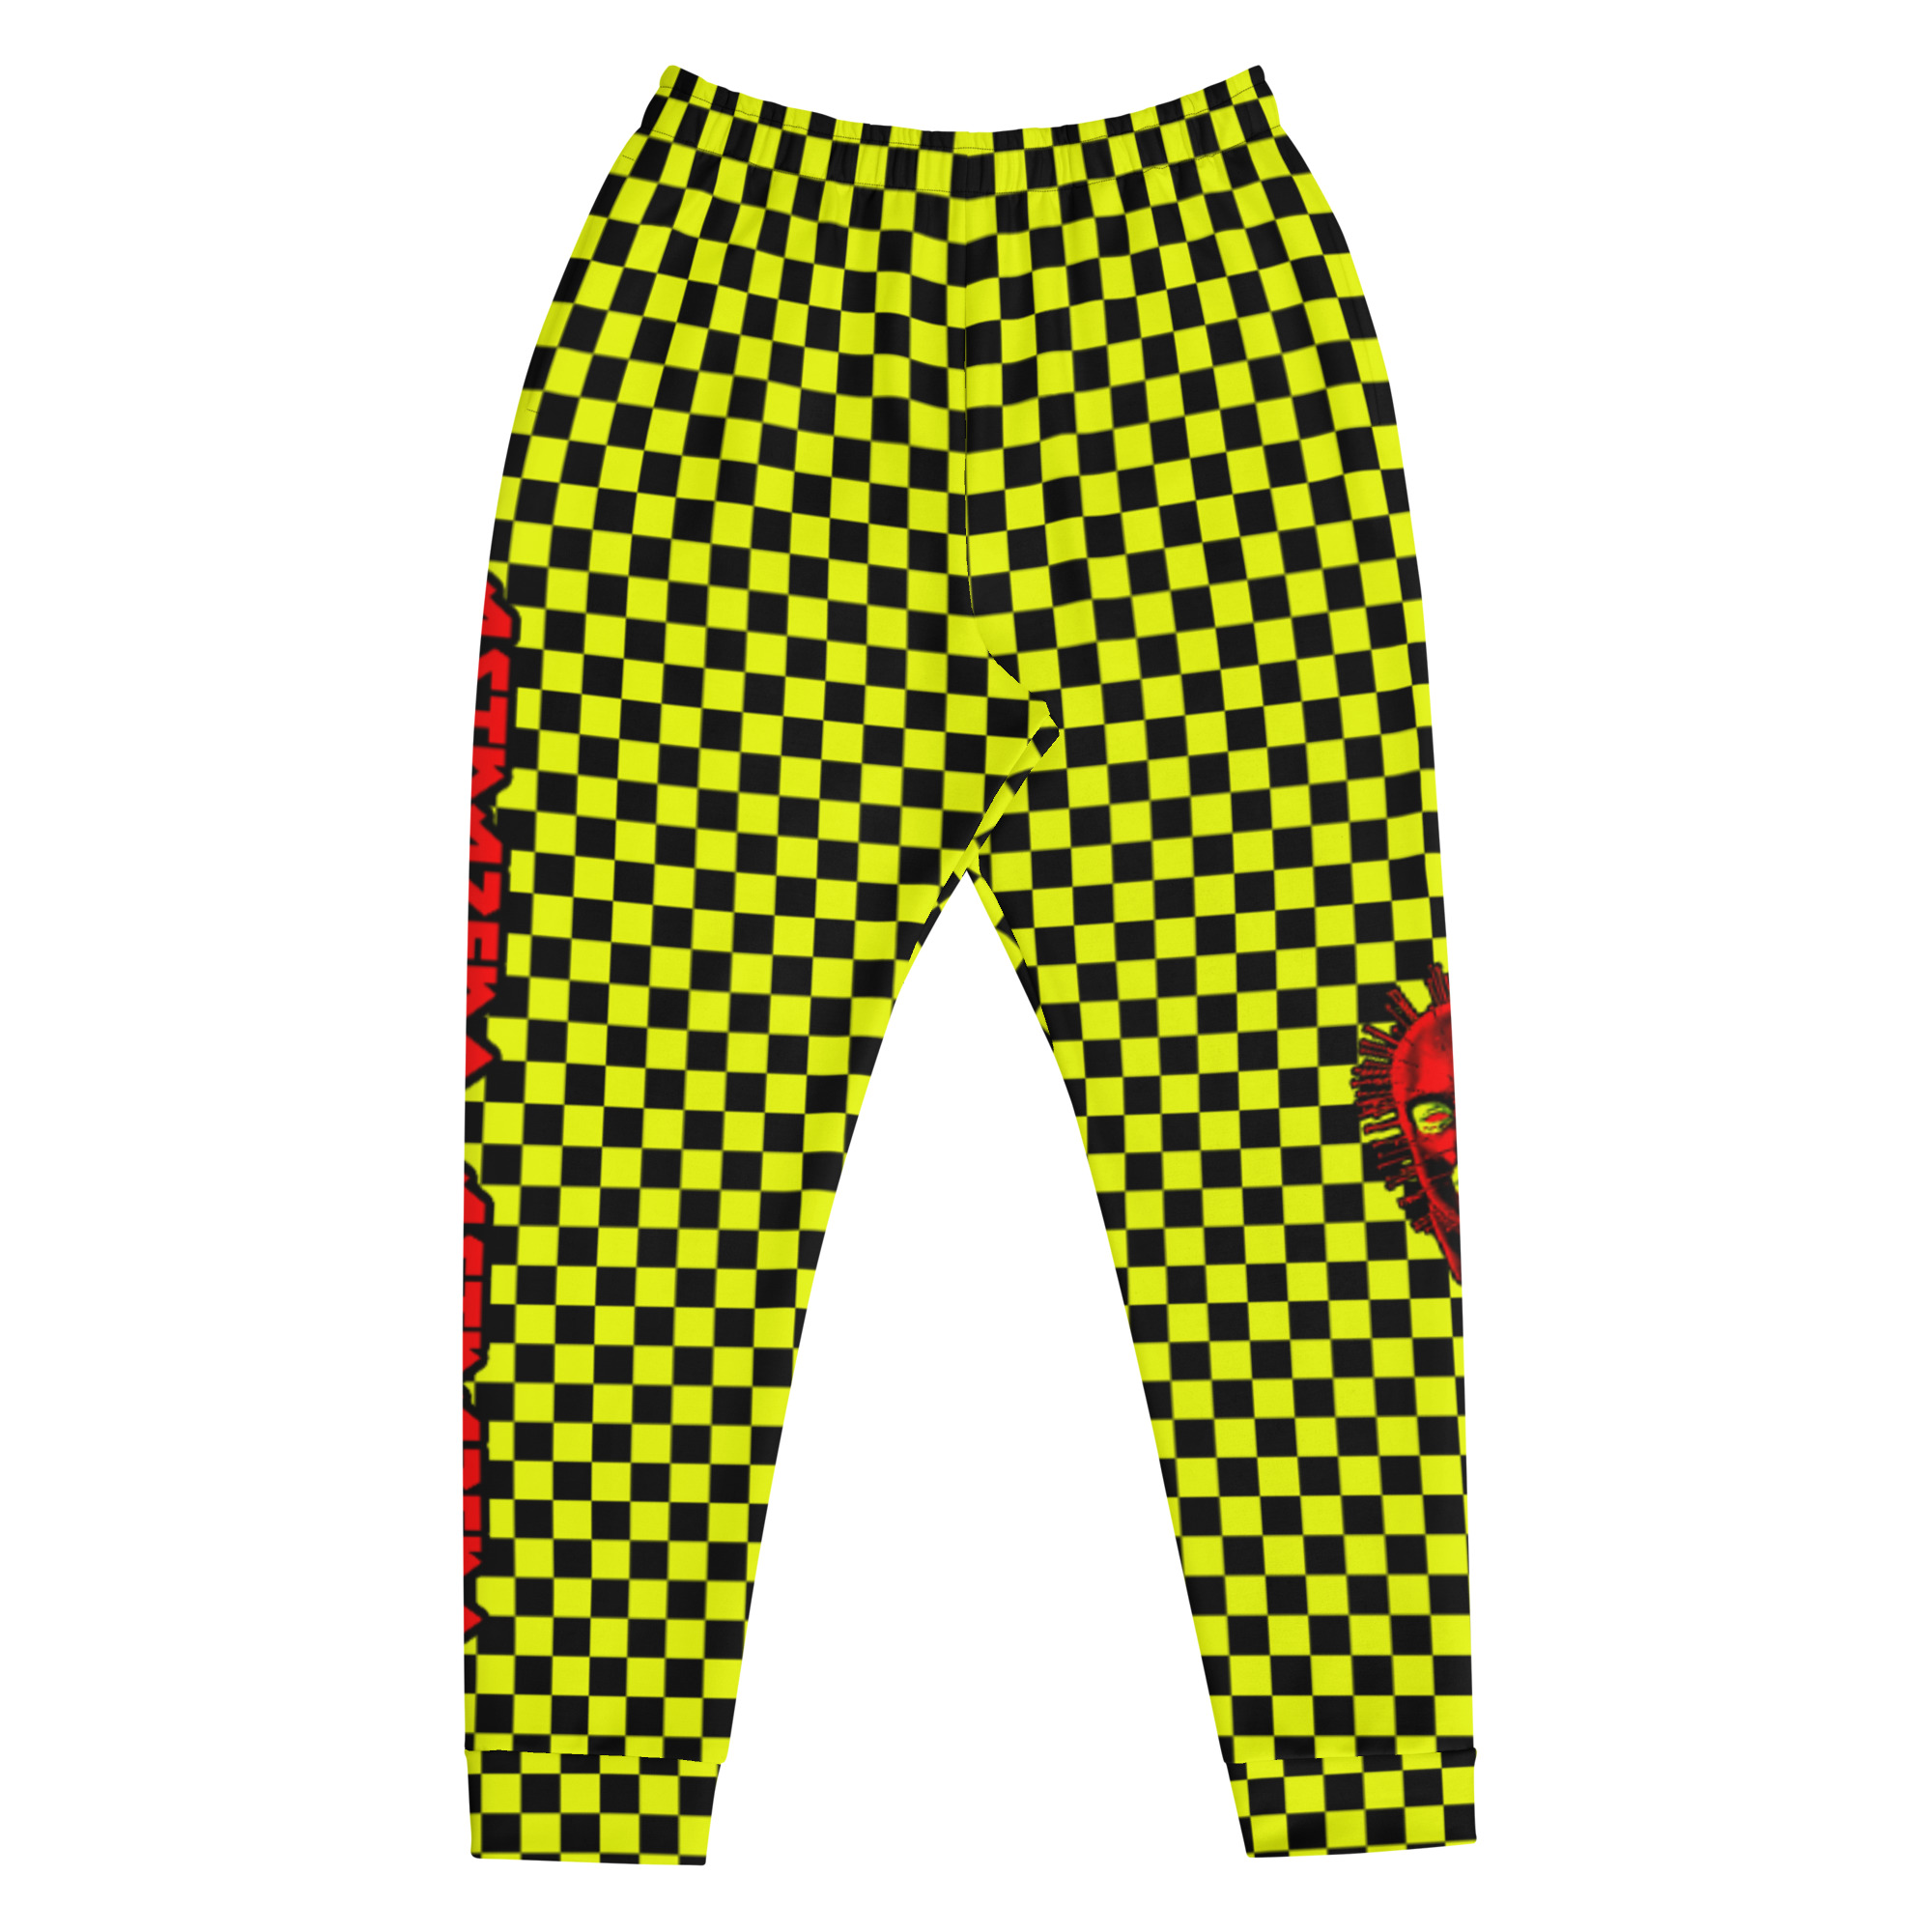 Featured image for “Bile Checker Punk pin -  Men's Joggers”